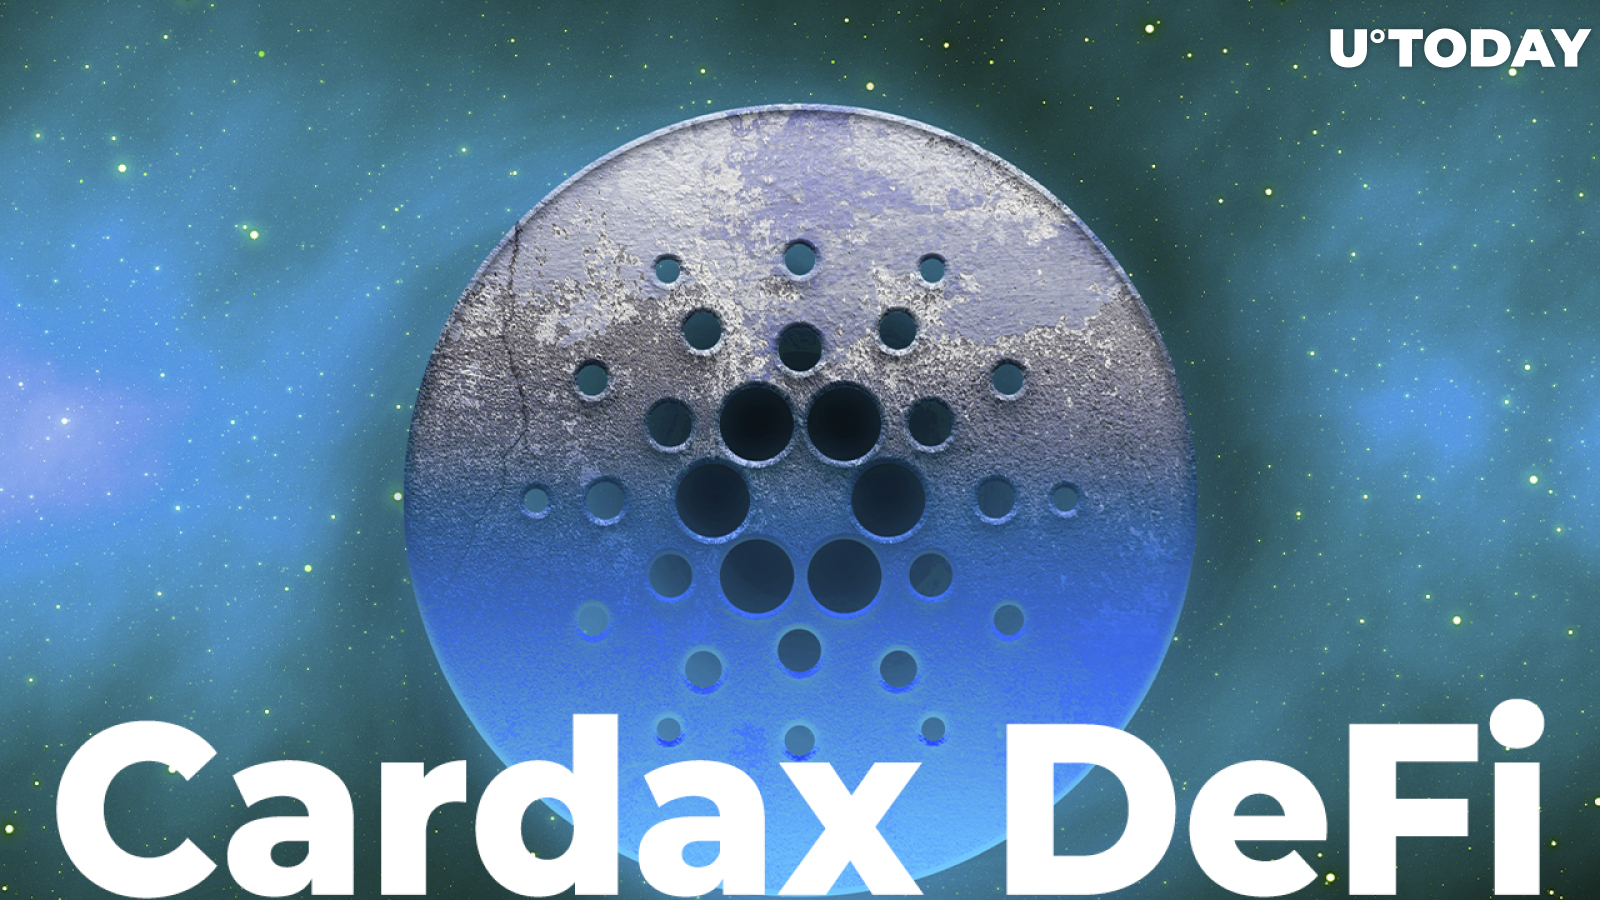 Cardax DeFi on Cardano Starts Security Audit, Shares Mainnet Release Date